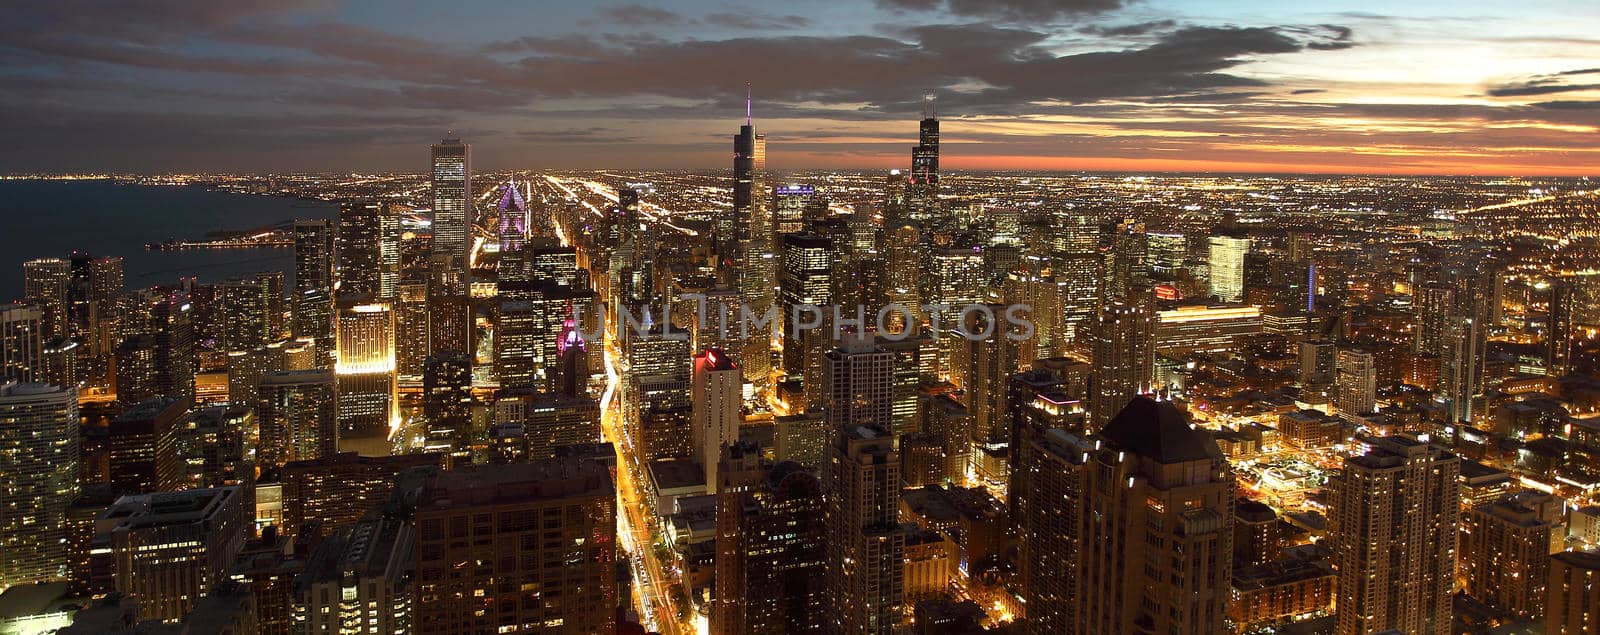 Atmospheric scene of Chicago at night showing Michigan Avenue and downtown